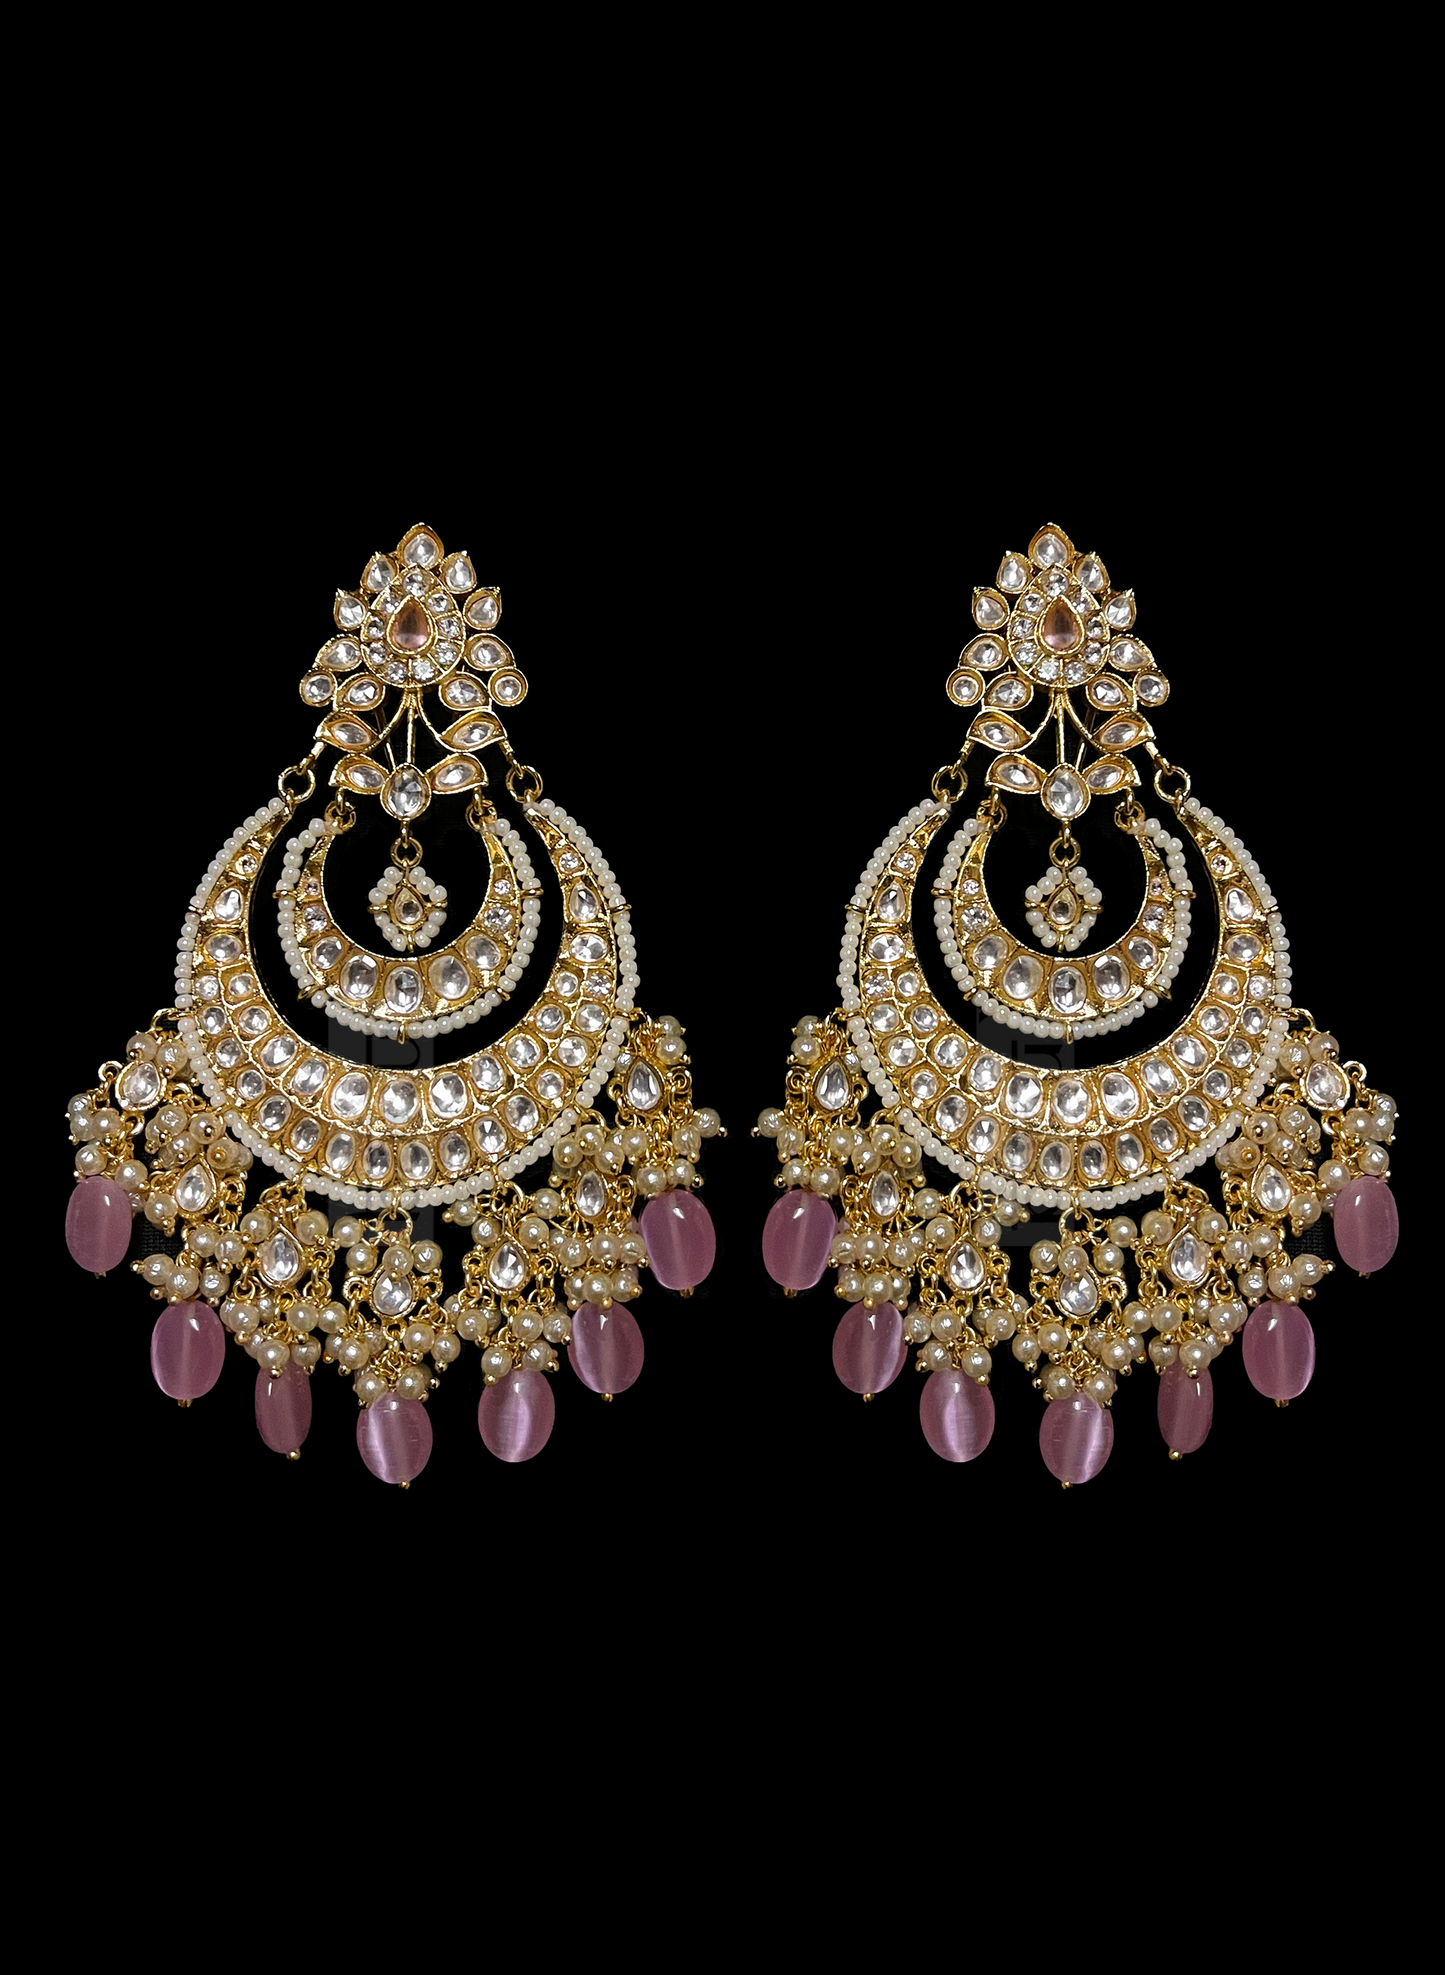 Load image into Gallery viewer, Indian Bridal Kundan Jhumka Earrings with Purple Stones for Brides
